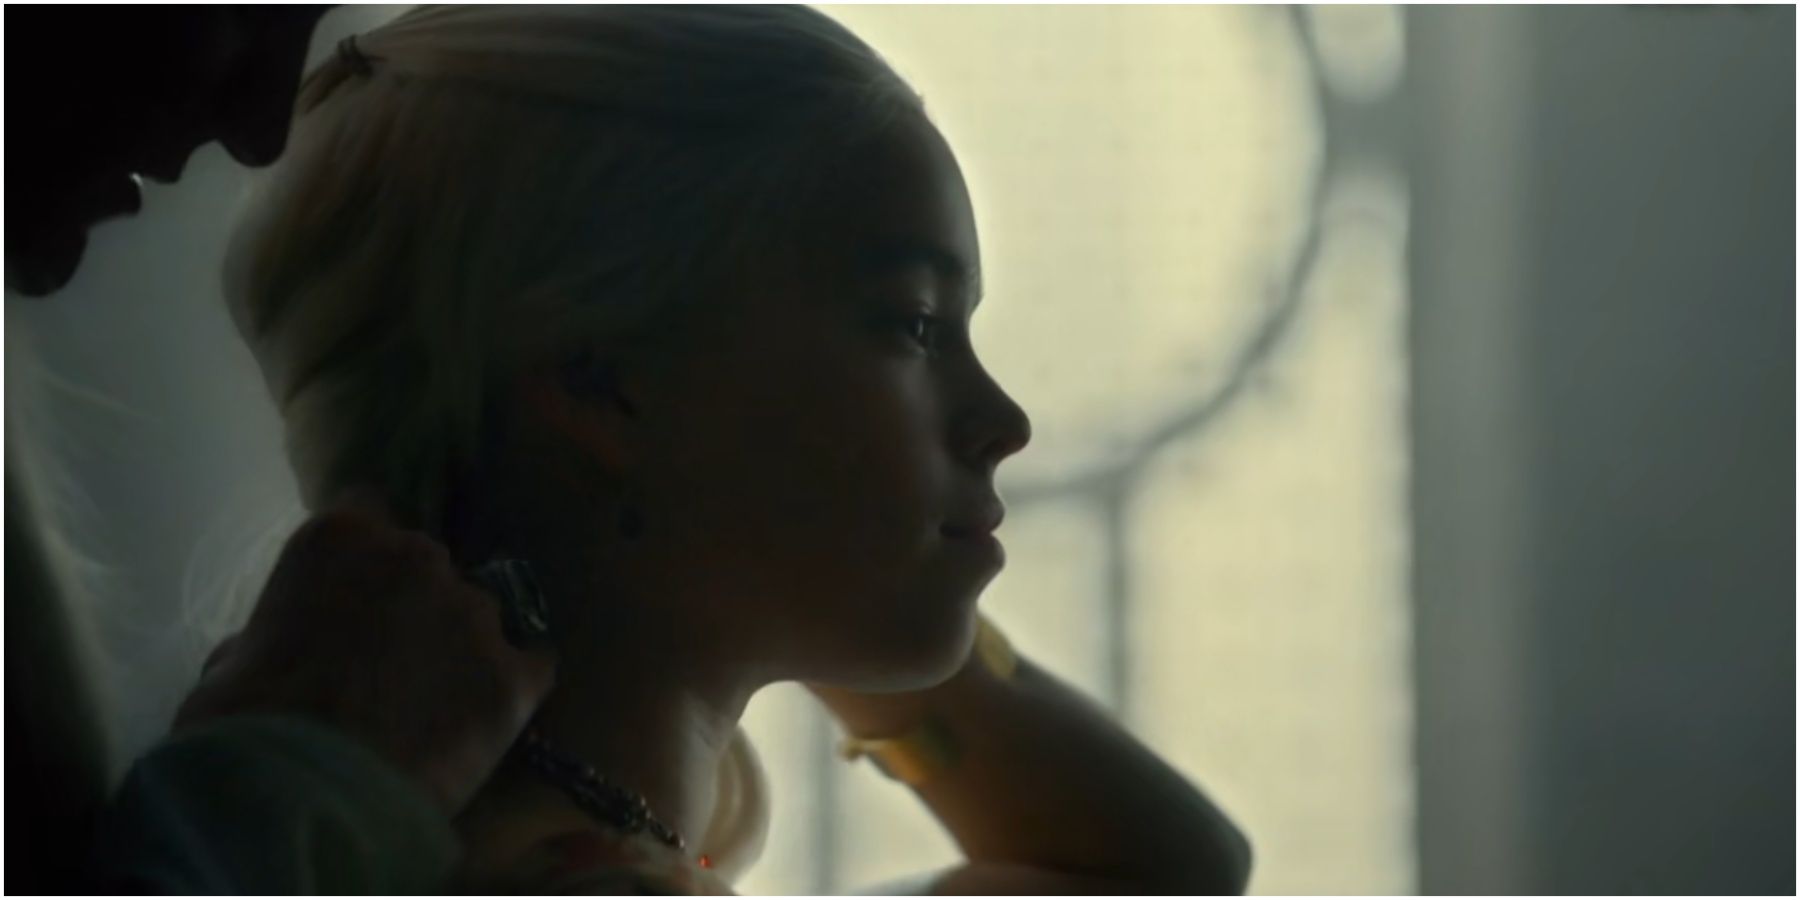 Daemon places a Valyrian steel necklace around Rhaenyra's neck in House of the Dragon.